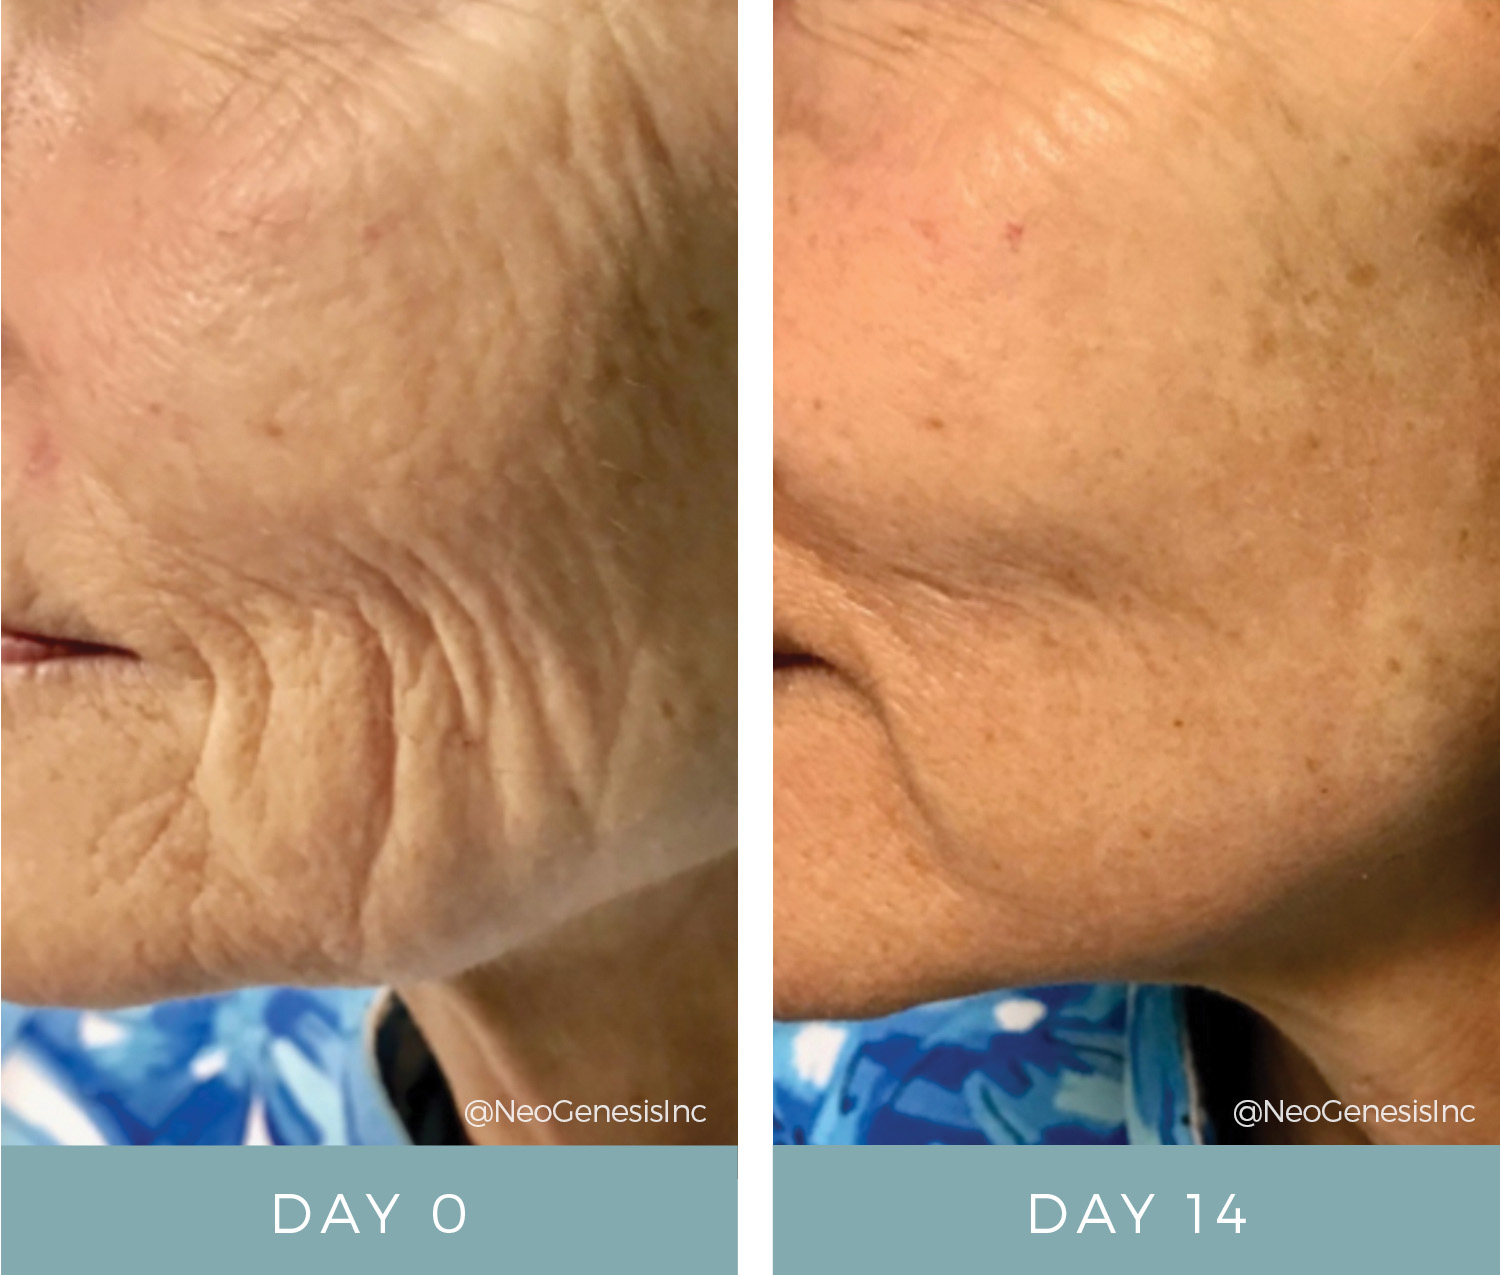 Fibroblast Before + After